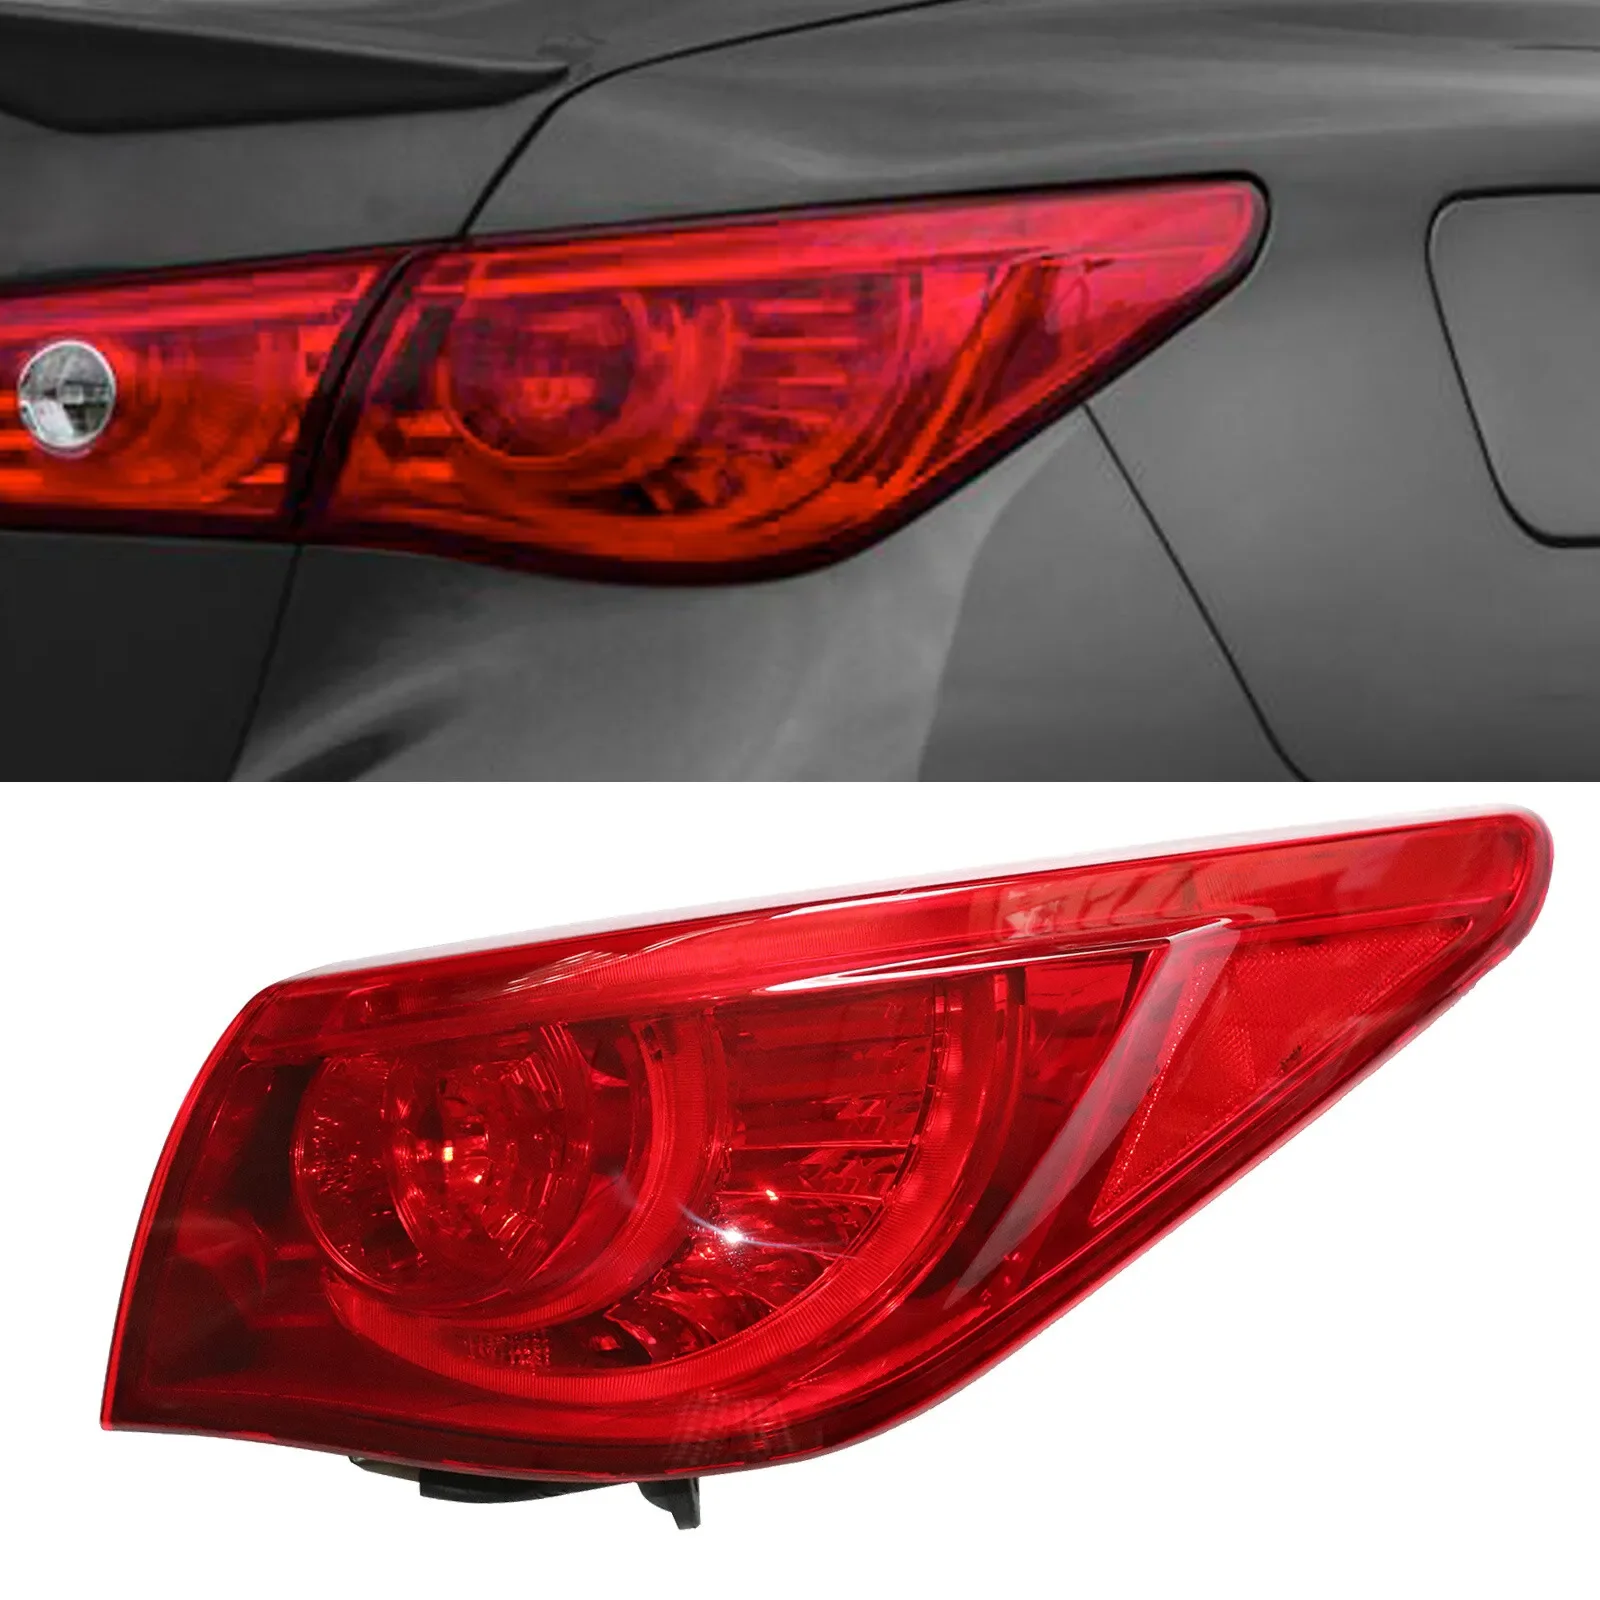 

Passenger Side Rear Outer Lamp Durable Right Side Tail Light Fits For Infiniti Q50 Q50s 2014 2015 2016 2017 RH Tail Light Lamp